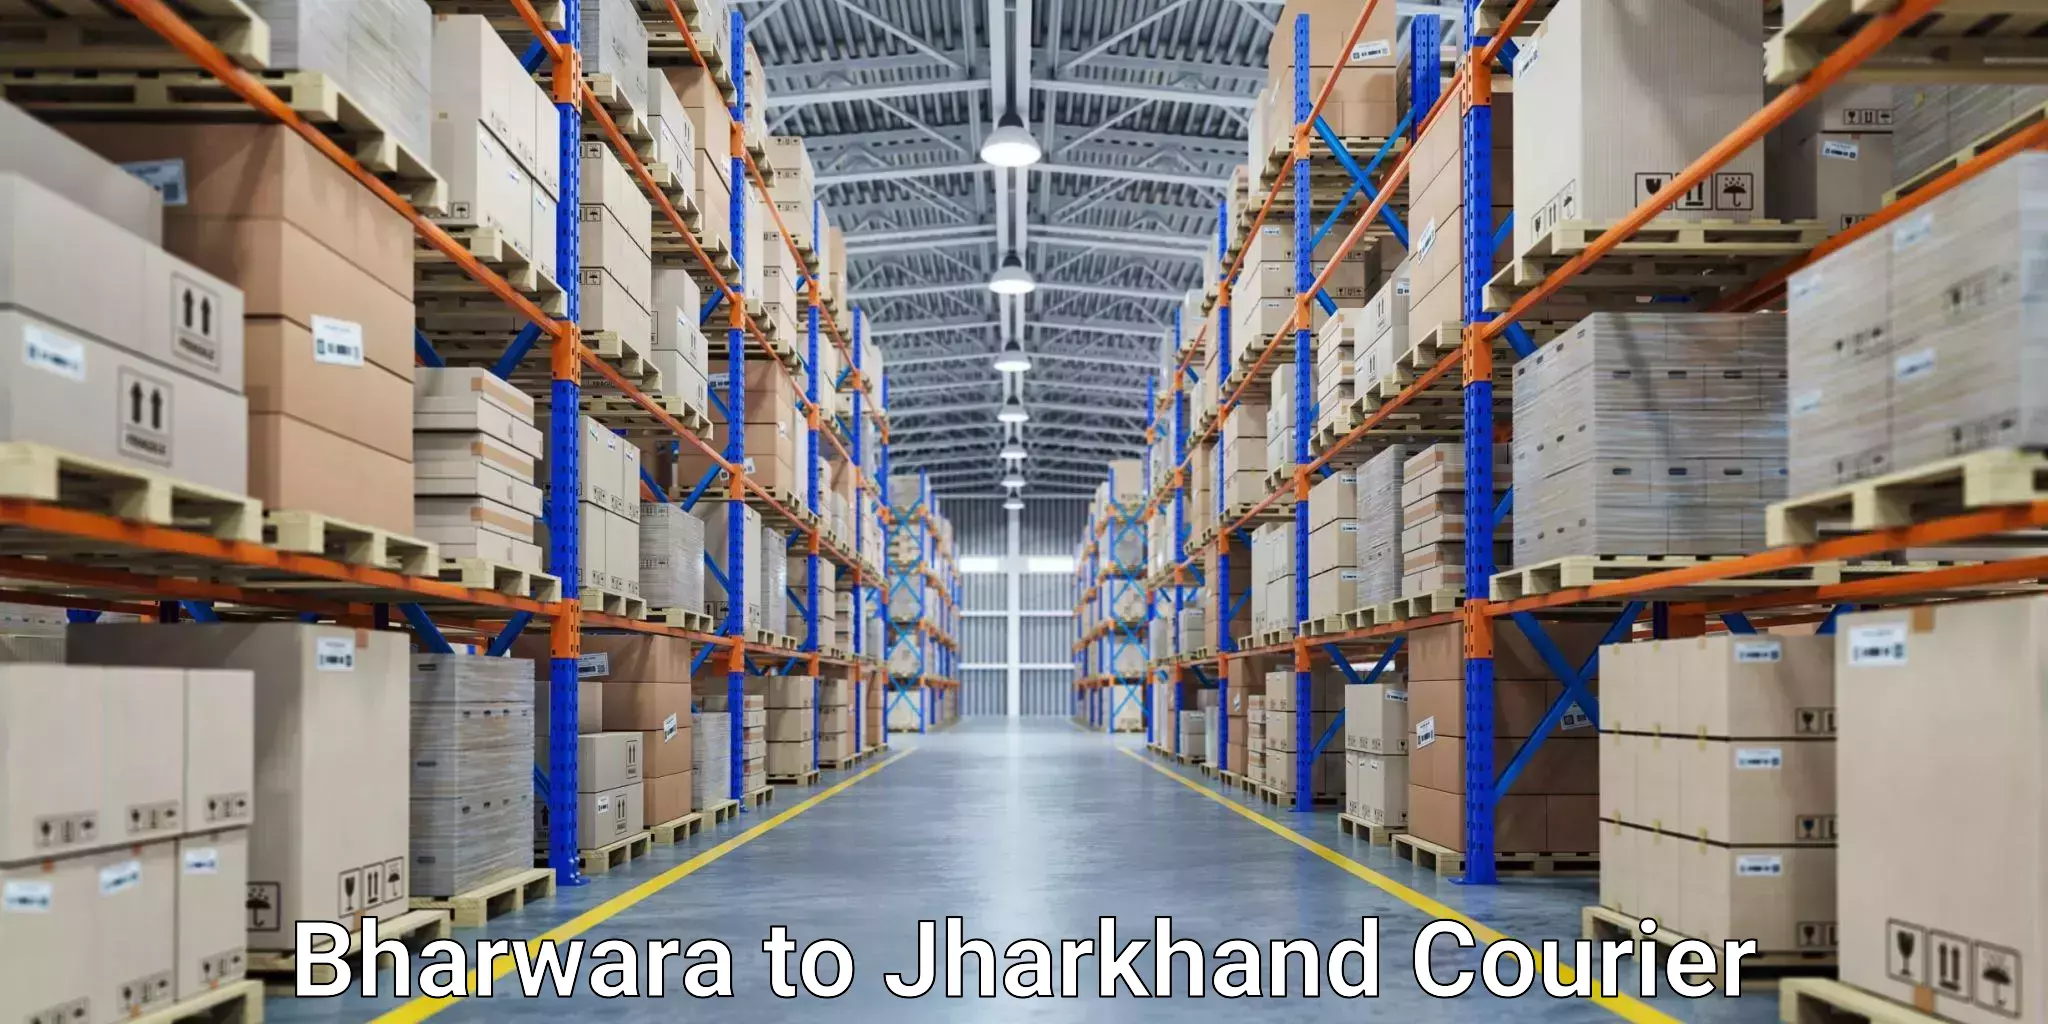 Same-day delivery solutions Bharwara to Hazaribagh